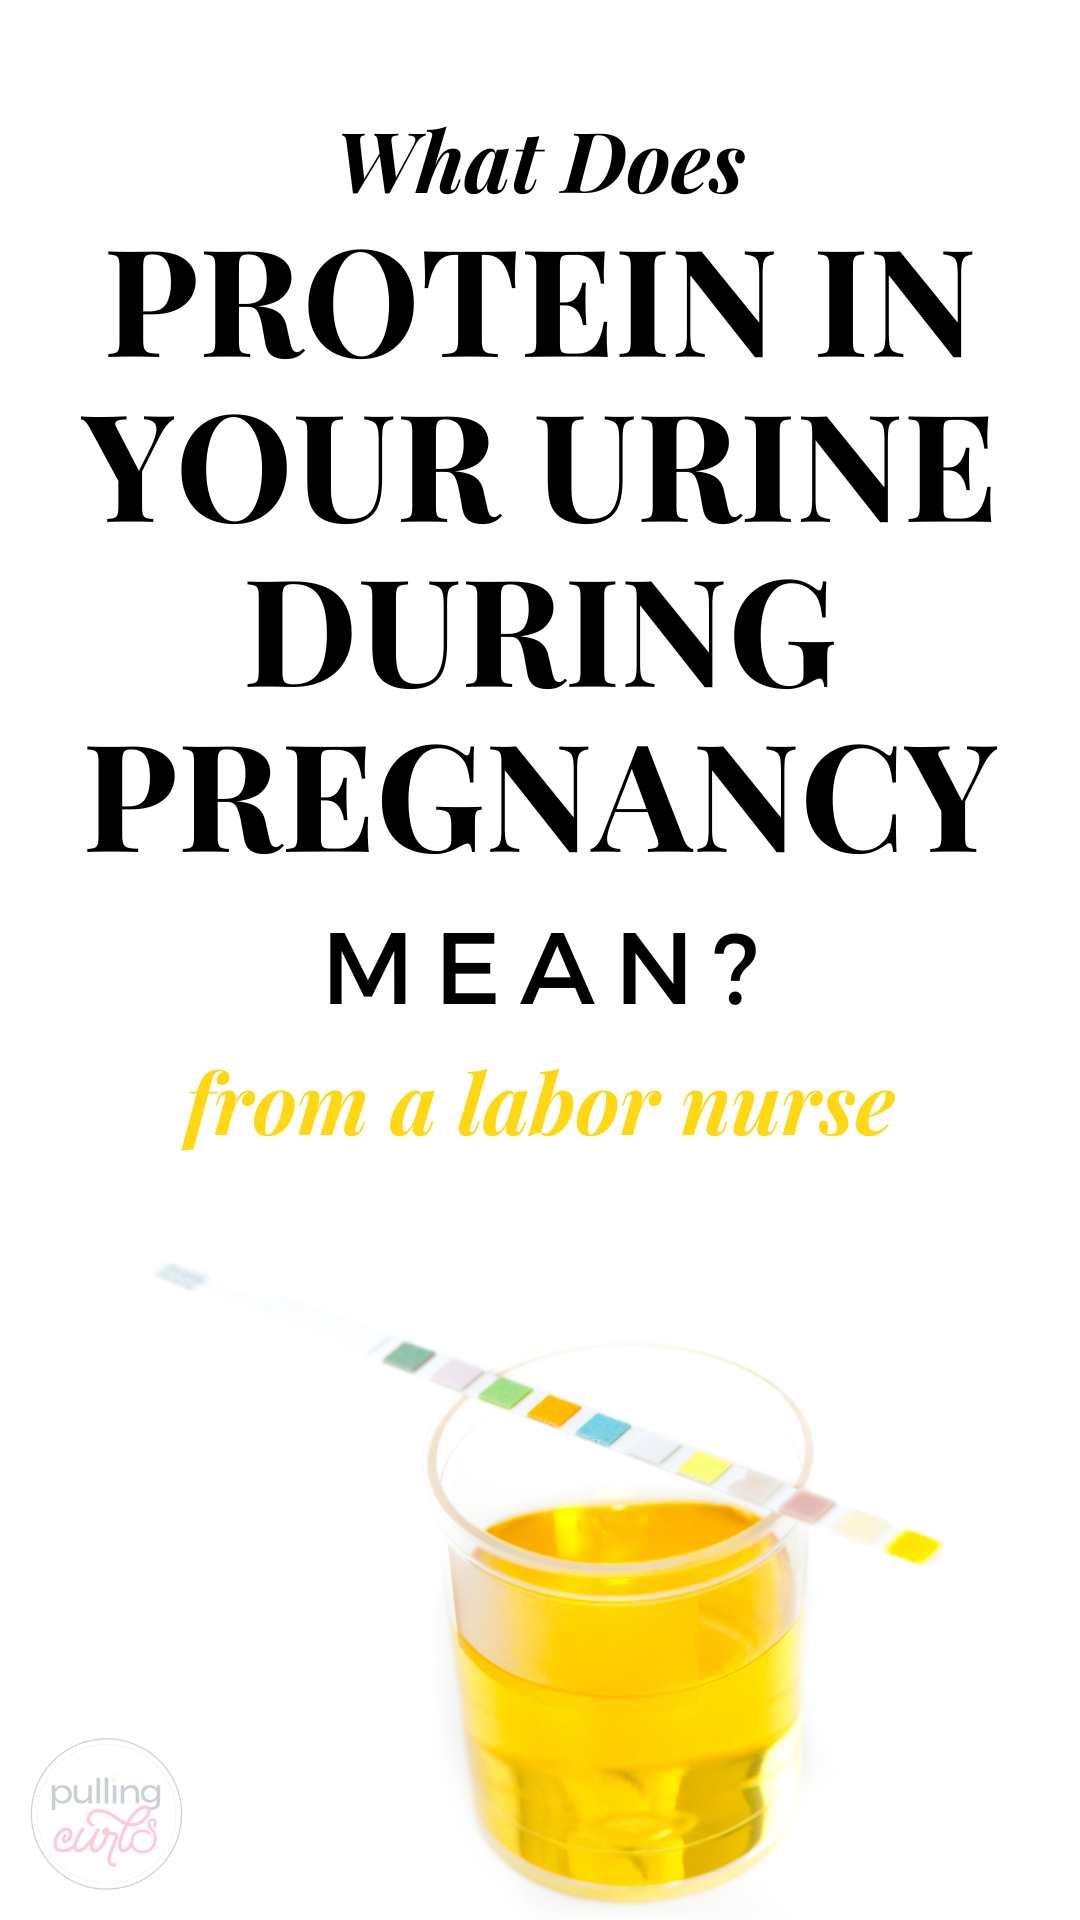 Protein In Urine During Pregnancy: What Does It Mean?